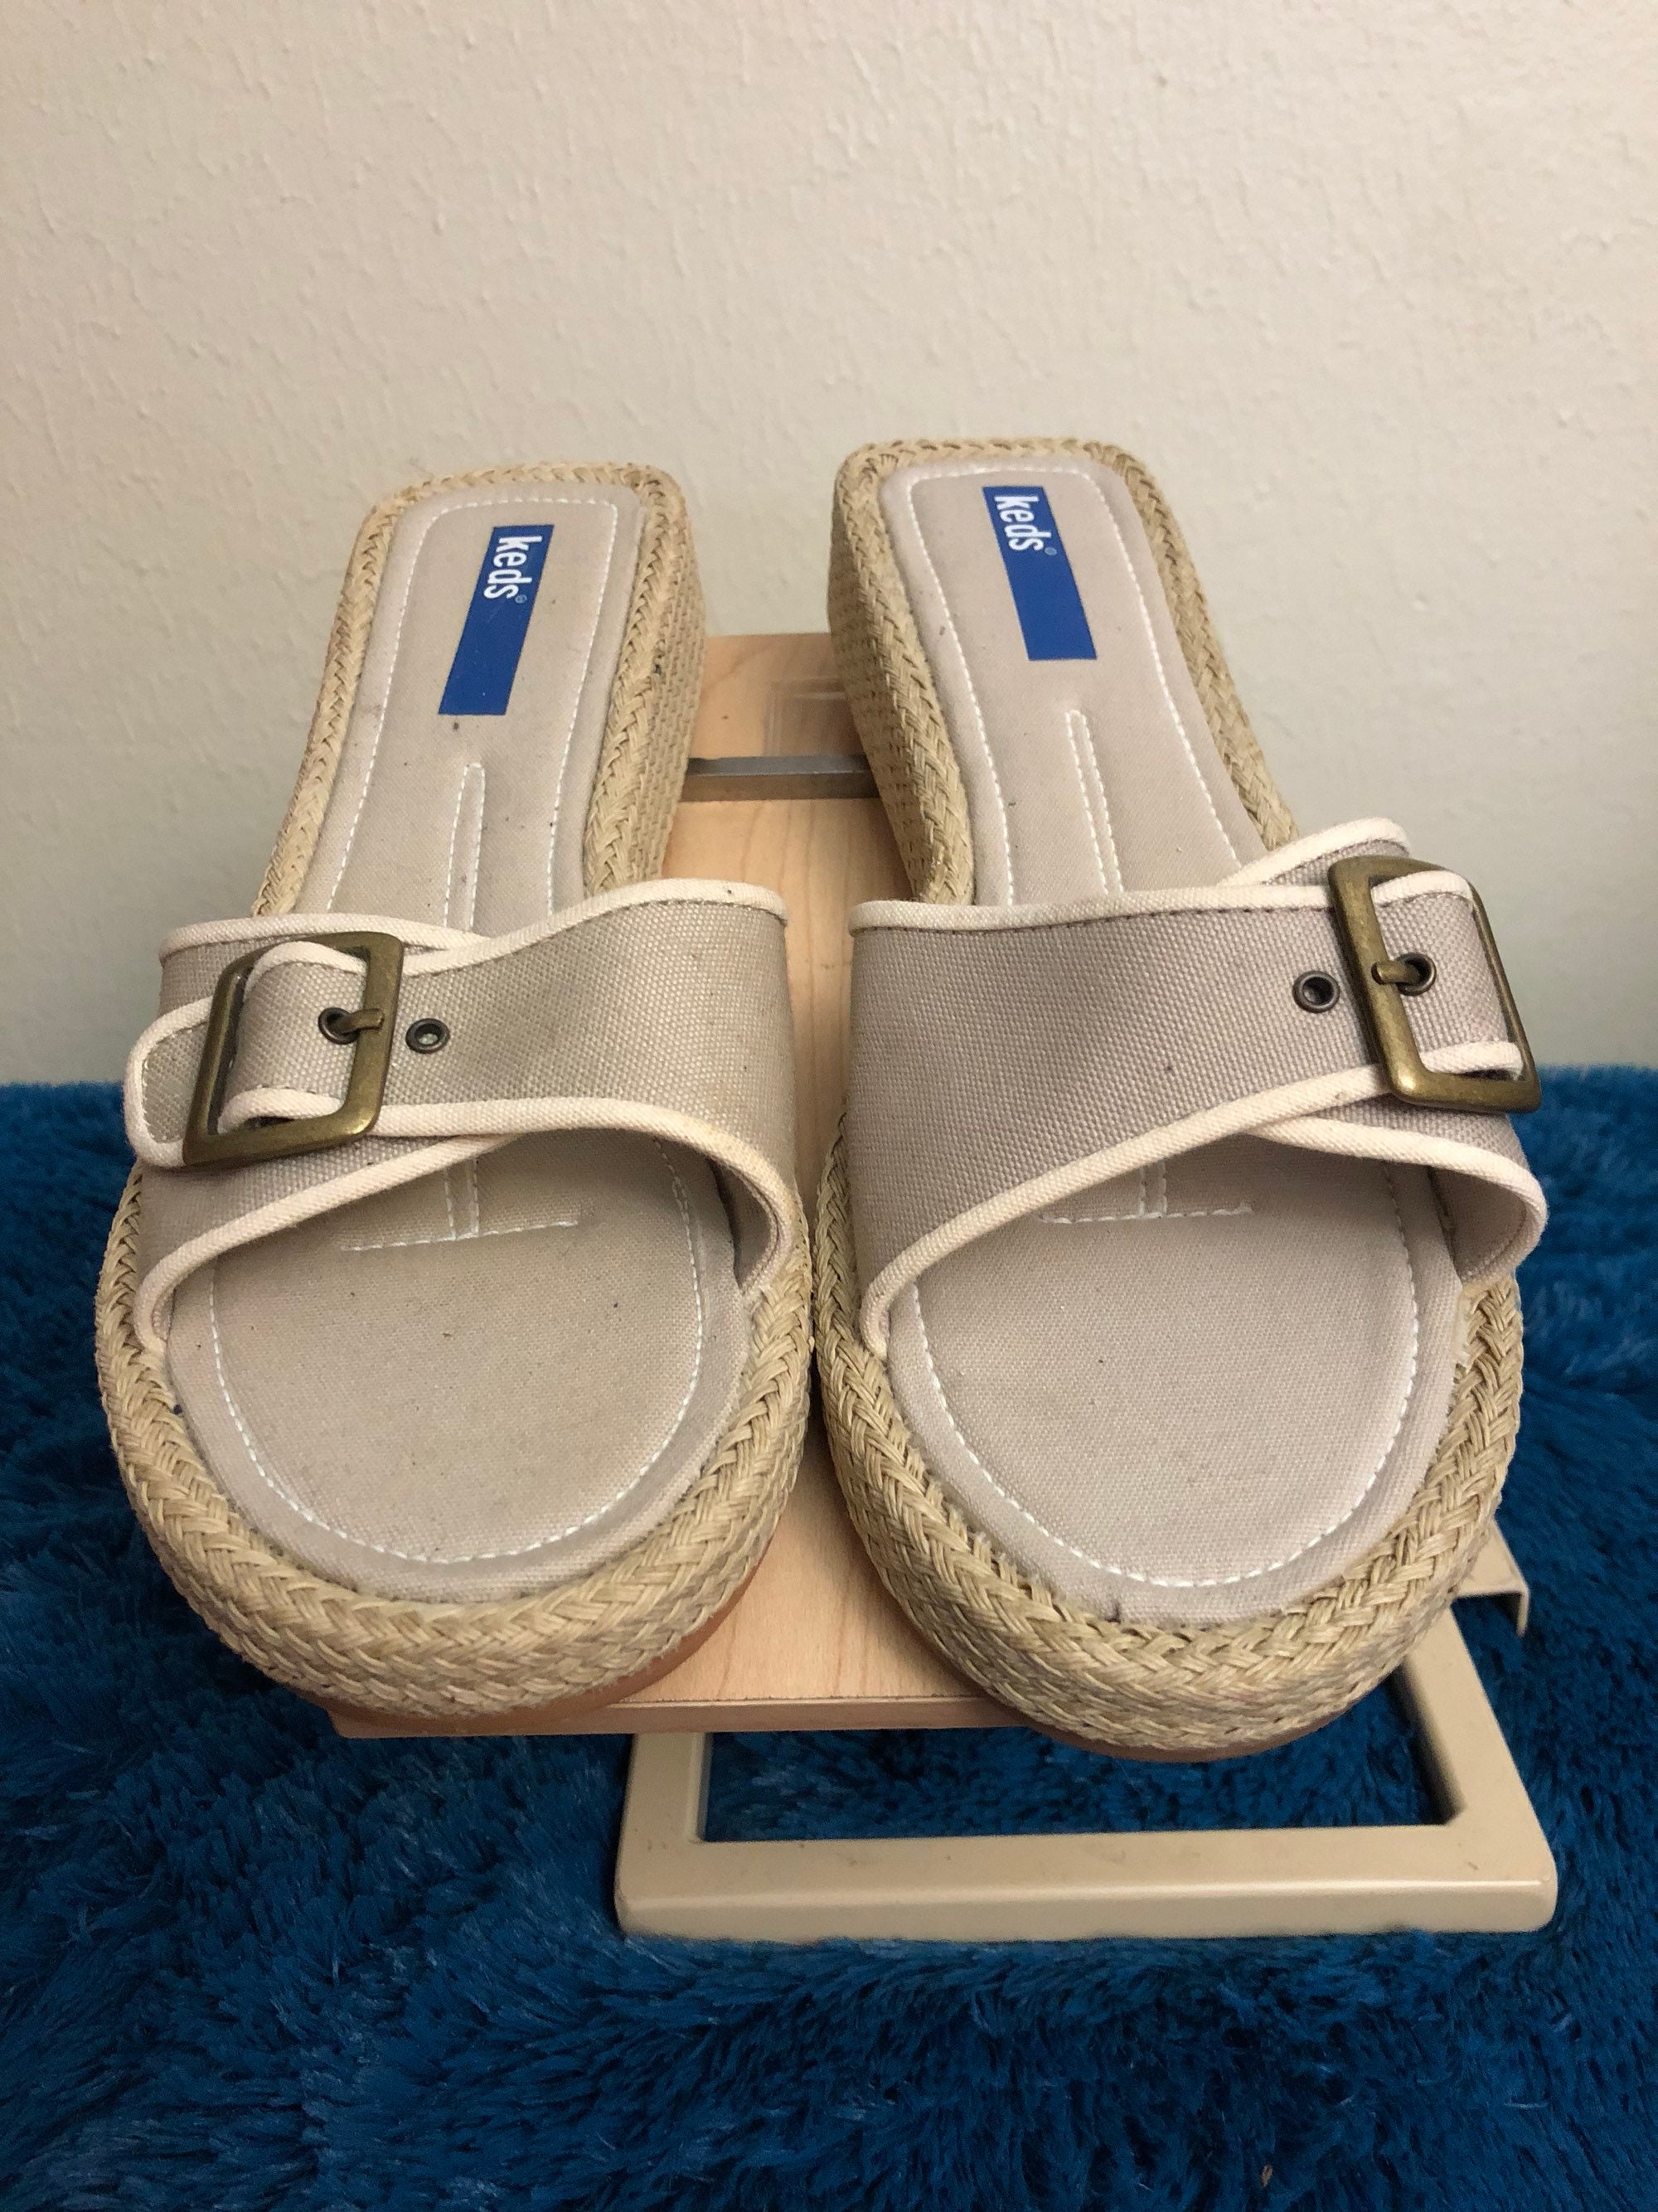 1990s Keds Womans Sandals Size 8.5 Brand New - Etsy UK